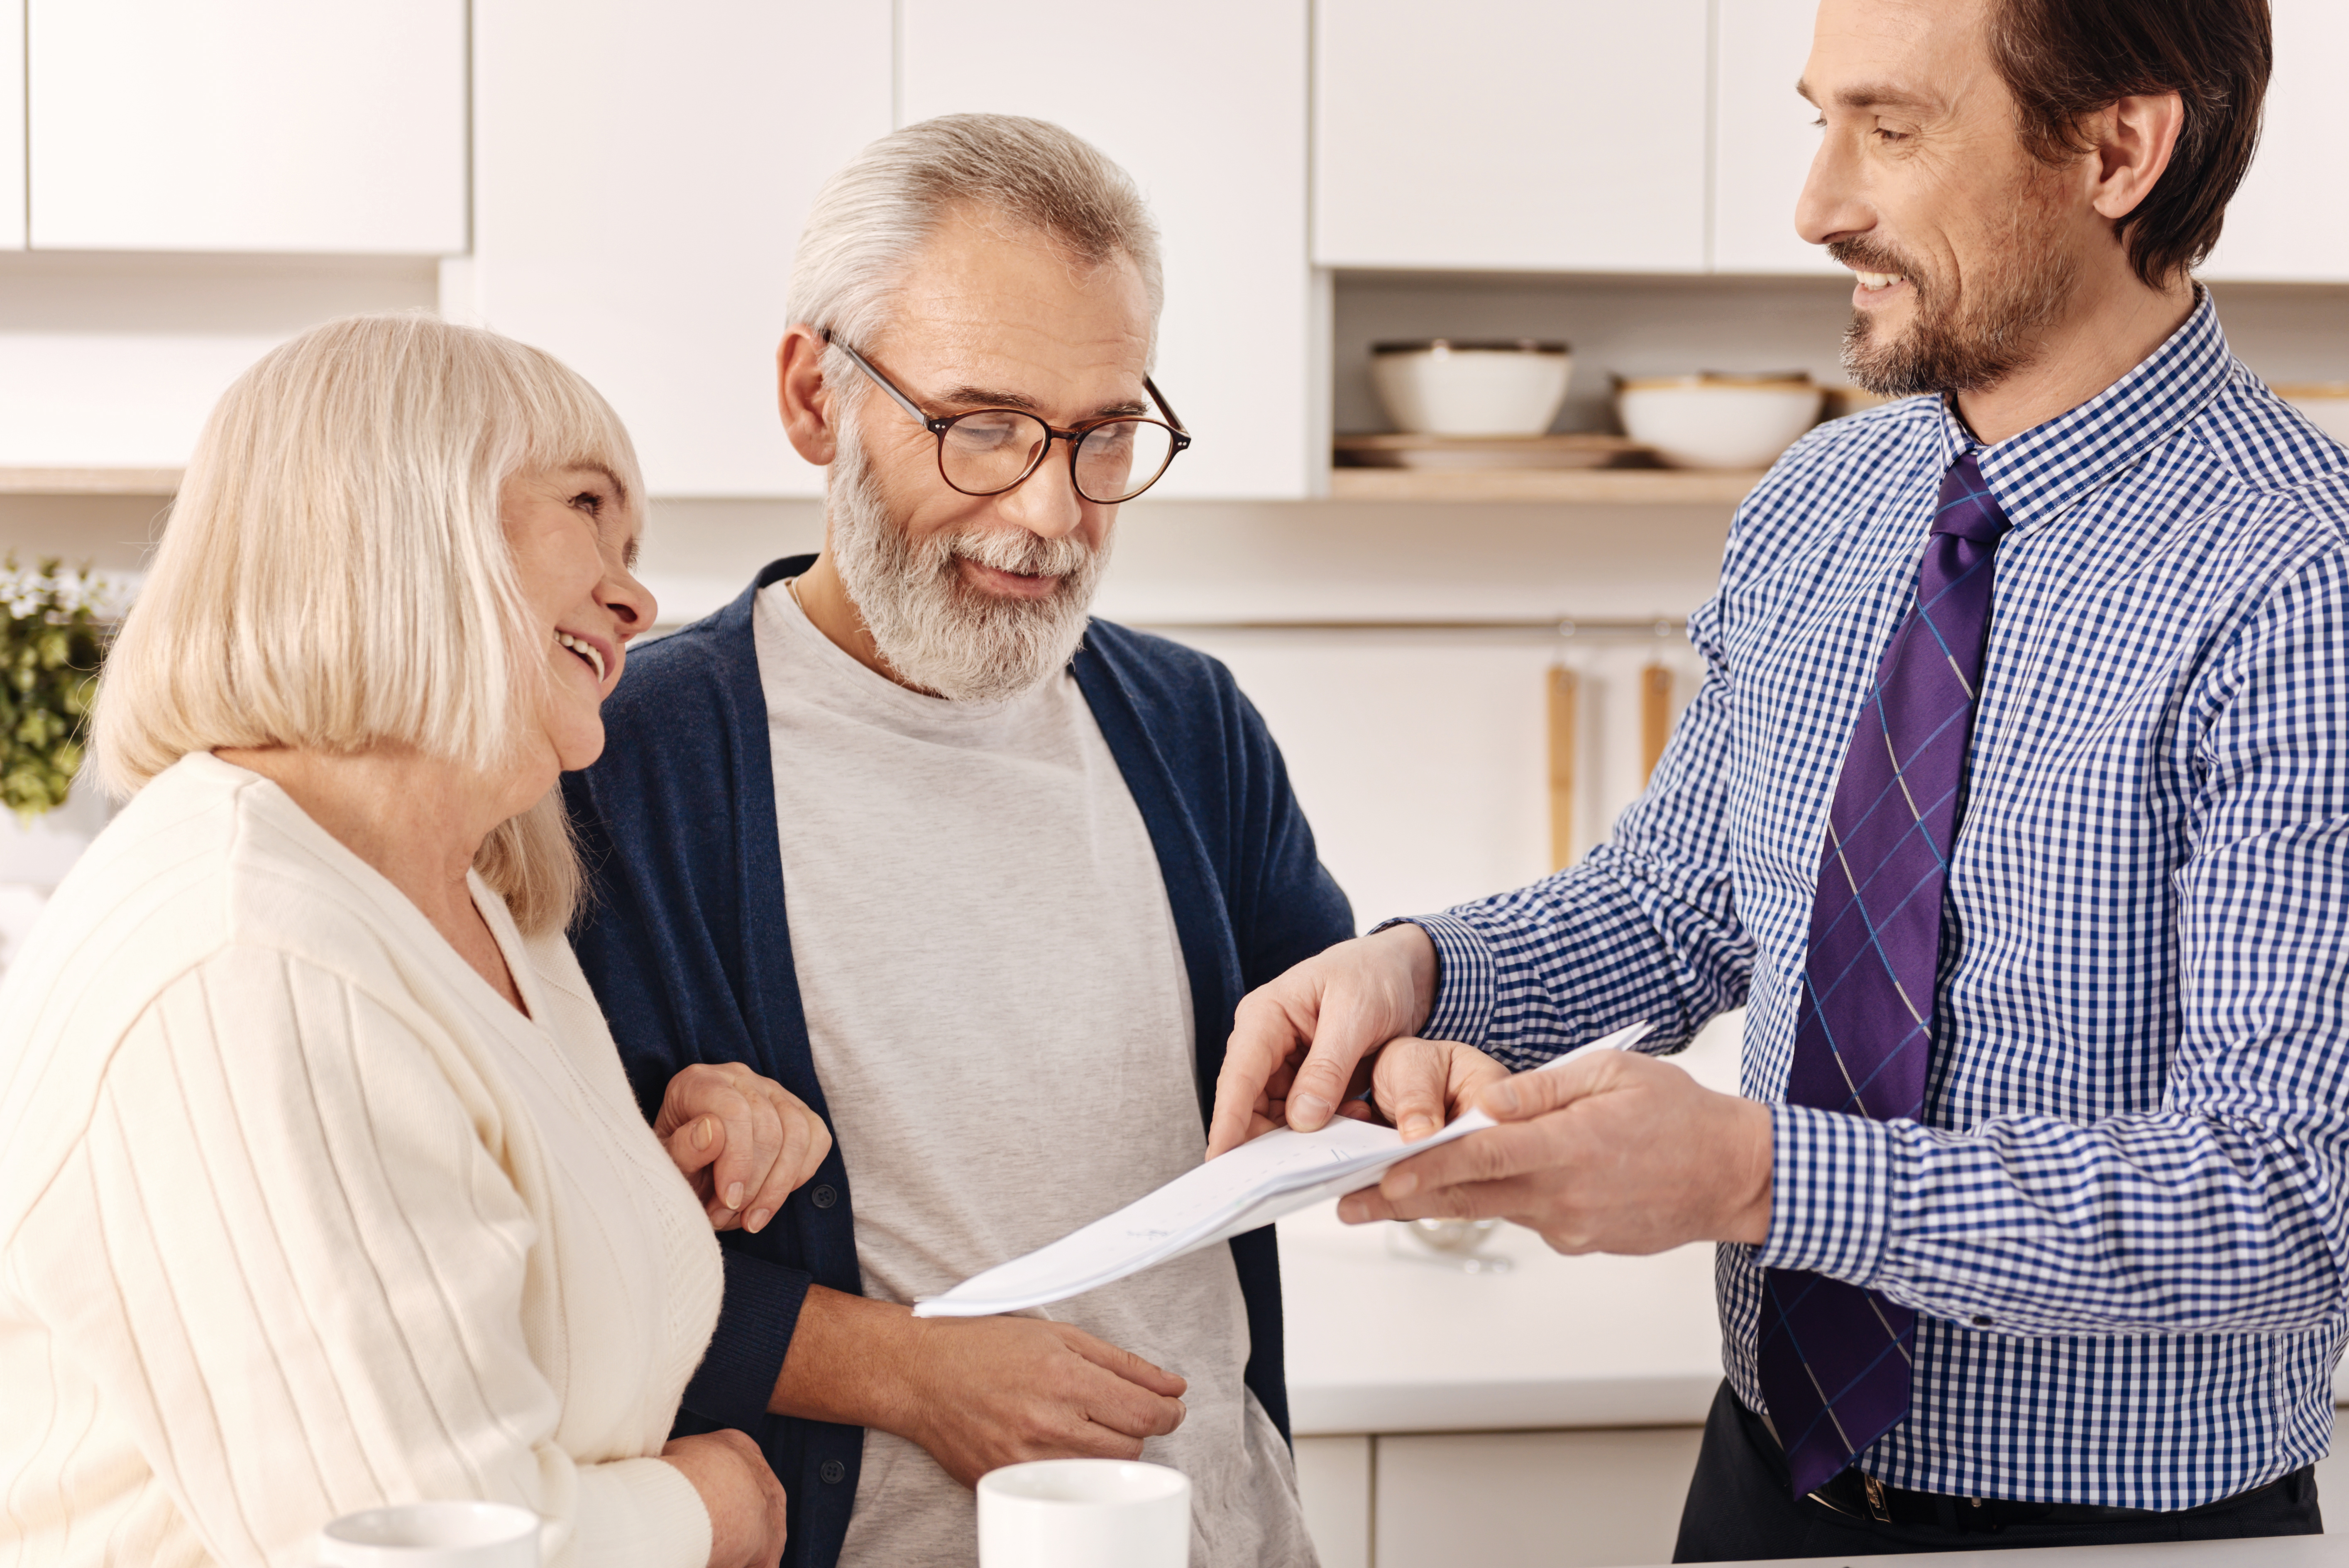 Wills vs. Trusts: Which Is Better For Estate Planning?